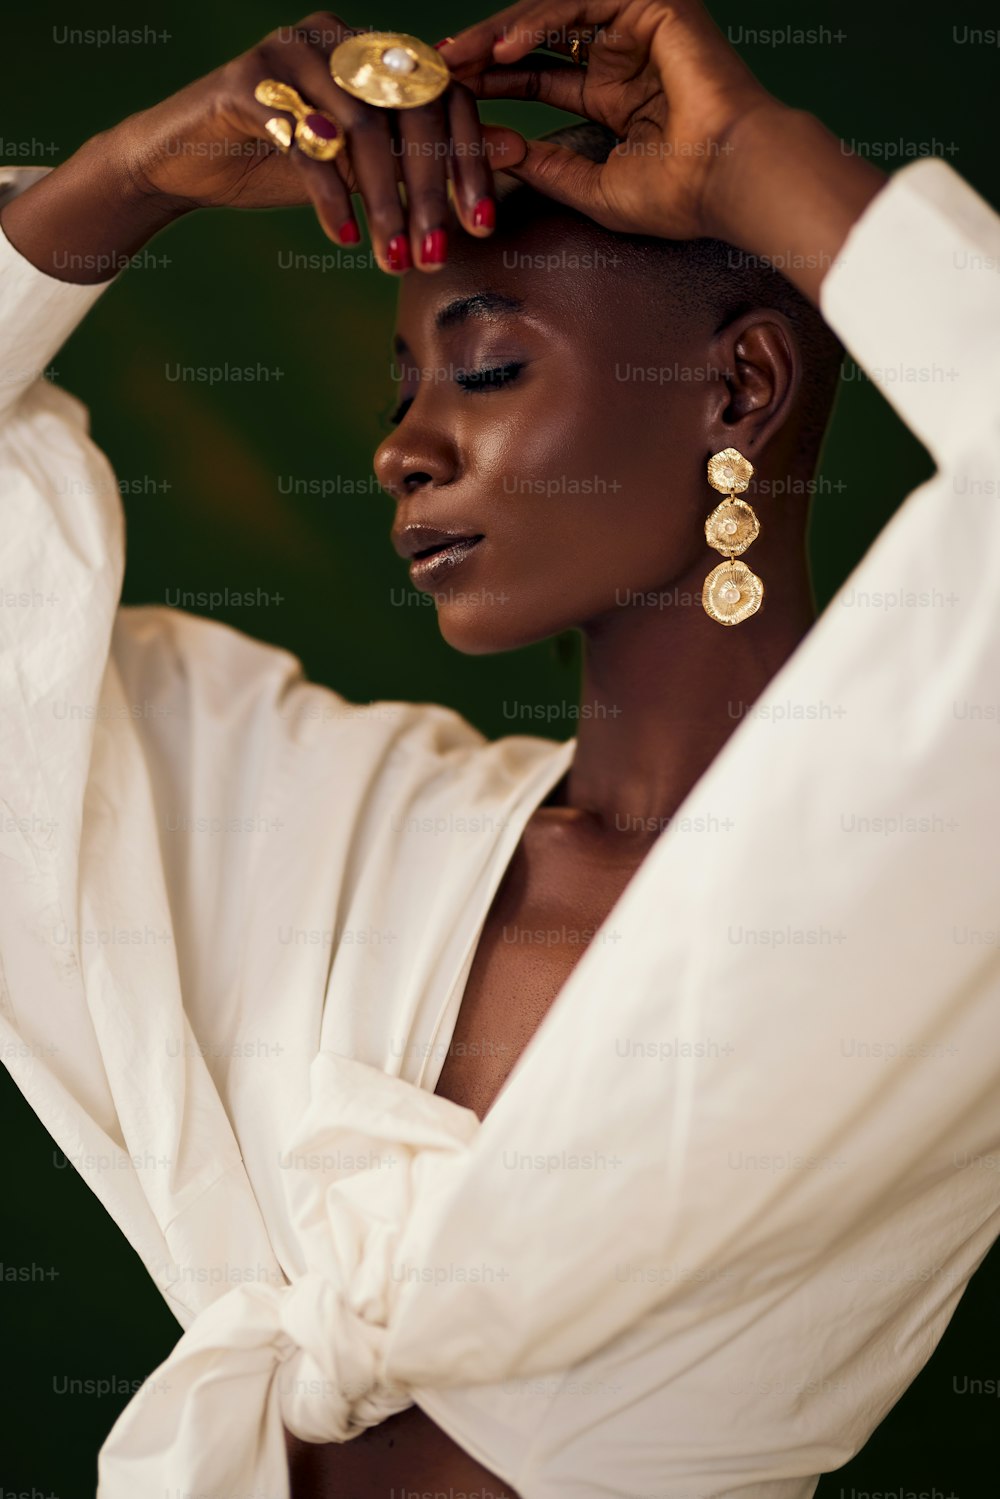 a woman in a white shirt and gold earrings